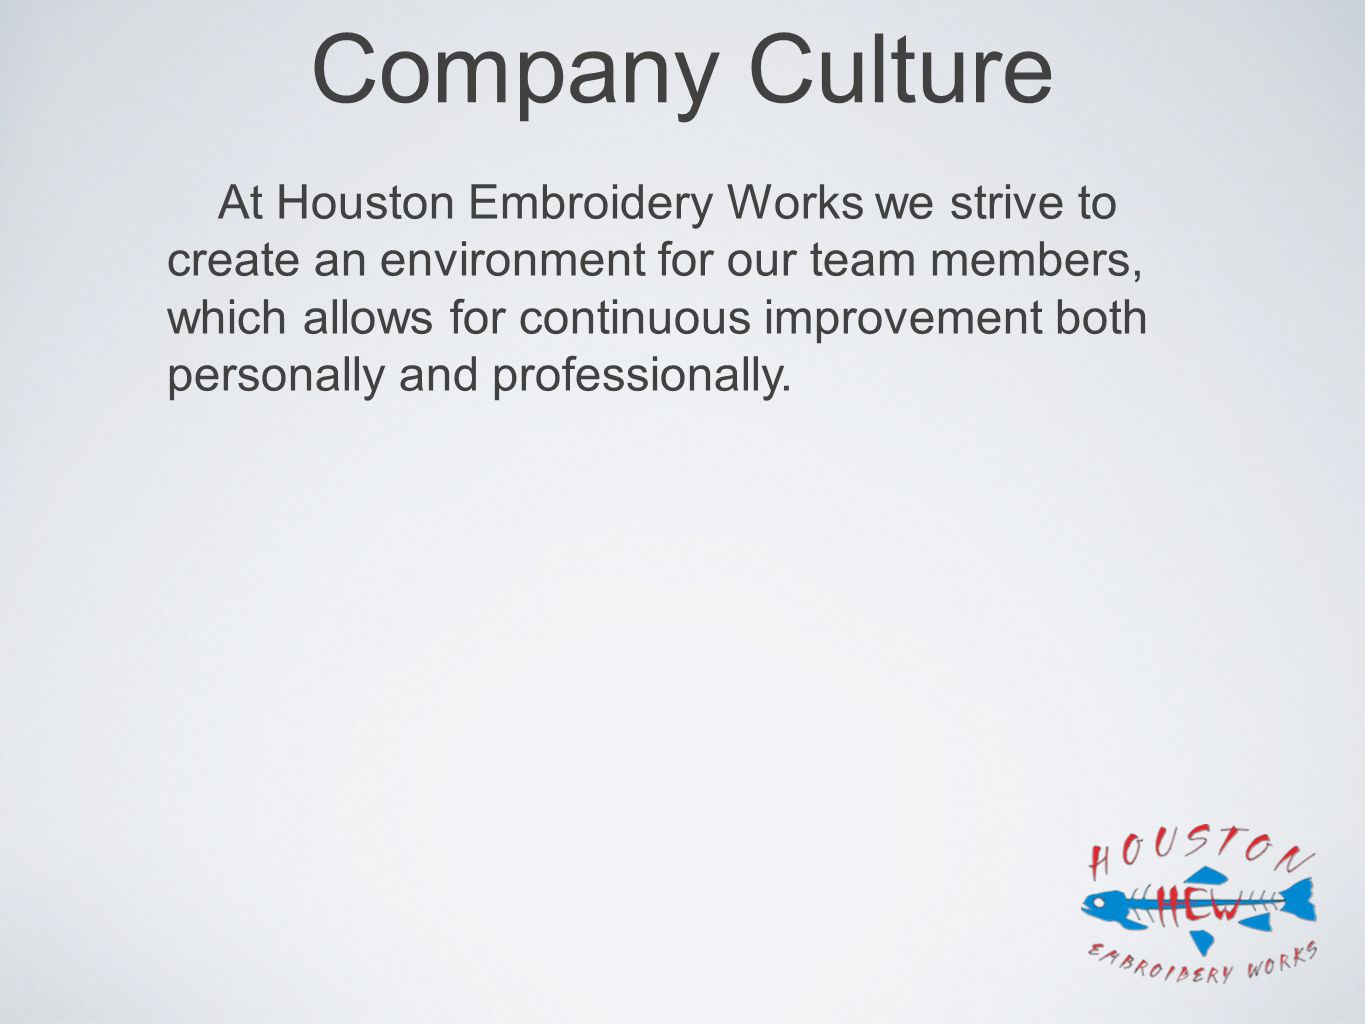 Company Culture At Houston Embroidery Works we strive to create an environment for our team members, which allows for continuous improvement both personally and professionally.